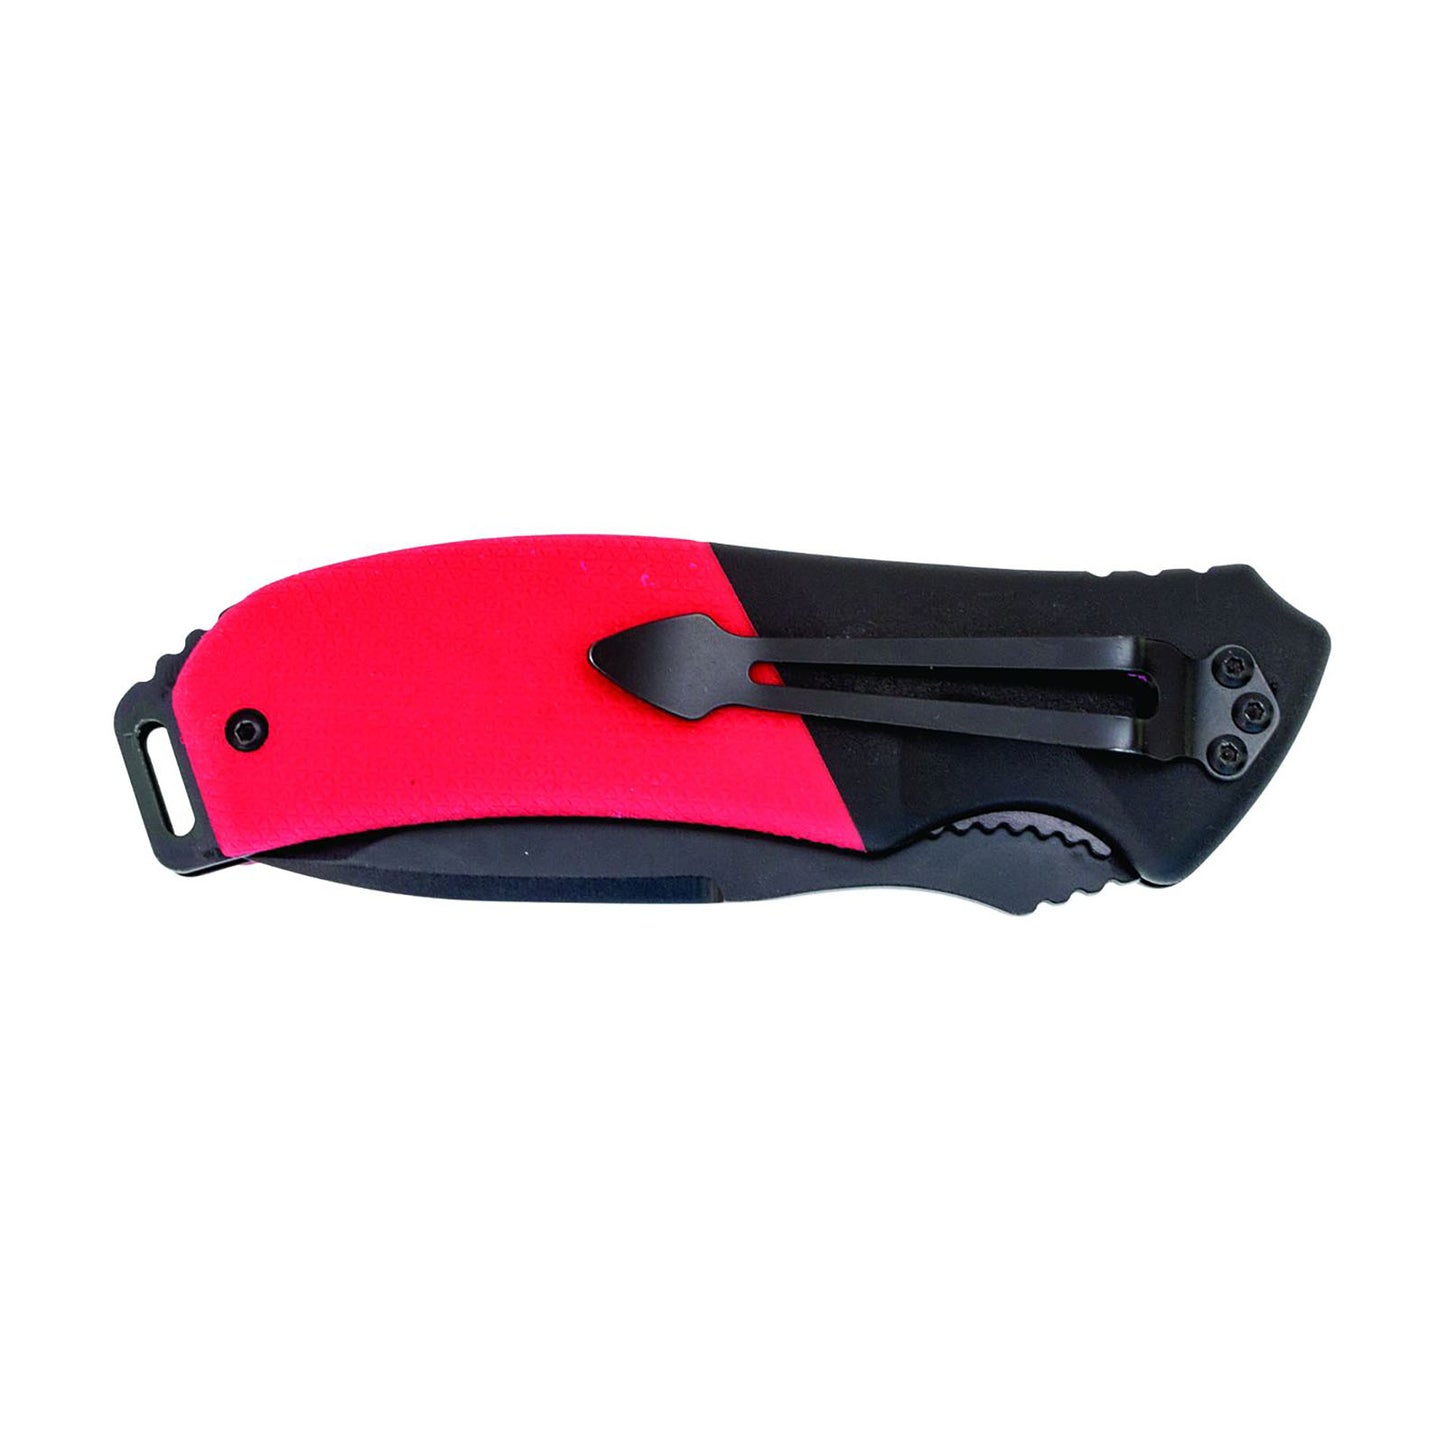 GEDORE red R93250008 - Pocket knife, 87 mm long, 2-component handle (3301615)